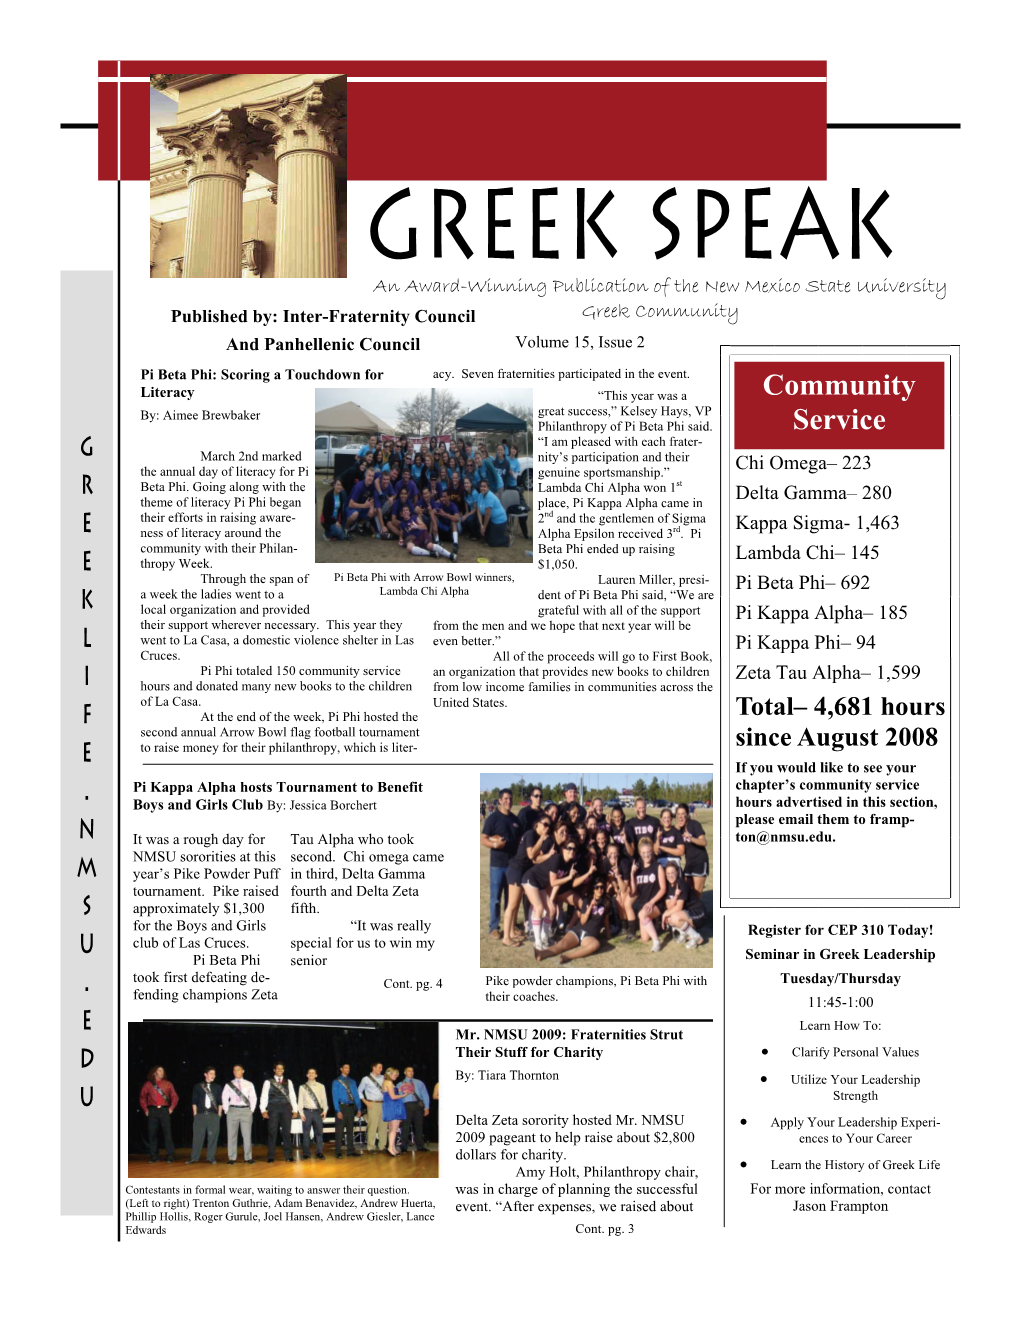 Greek Speak an Award-Winning Publication of the New Mexico State University Published By: Inter-Fraternity Council Greek Community